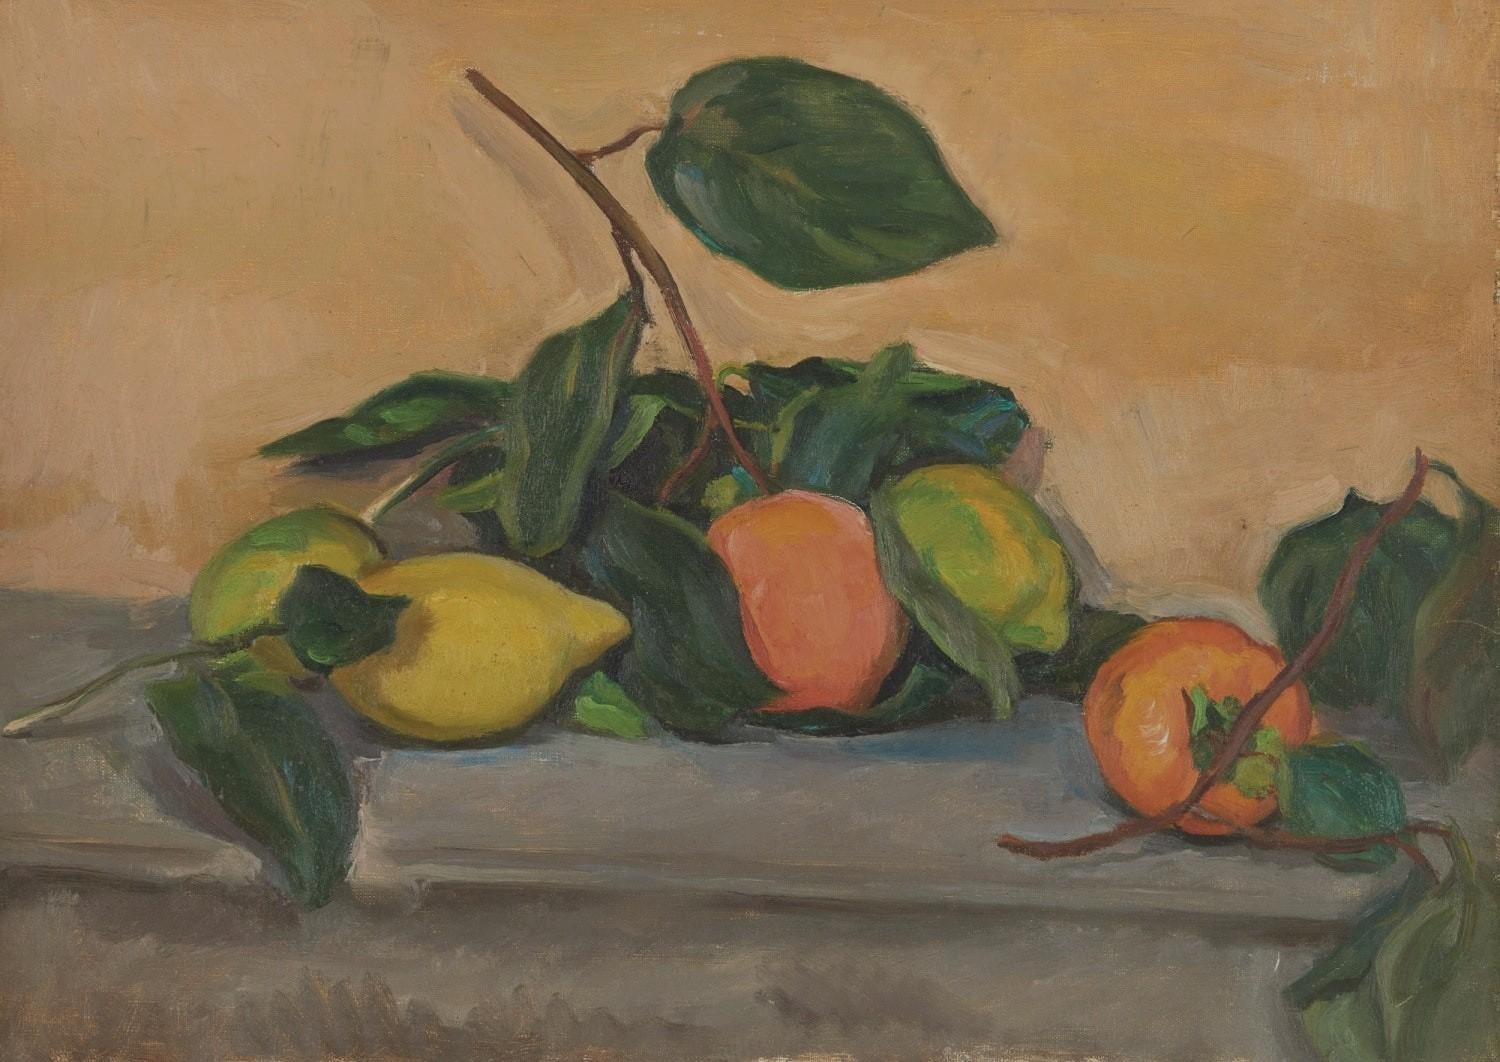 Jean de Gaigneron (1890-1976)
Still Life with Lemons and Oranges 
Oil on canvas
33 x 46 cm
Modern frame :  47 x 60 cm
Provenance : Estate of the Artist (not signed)

Jean de Gaigneron, the youngest son of the second marriage of Viscount Marie Paul